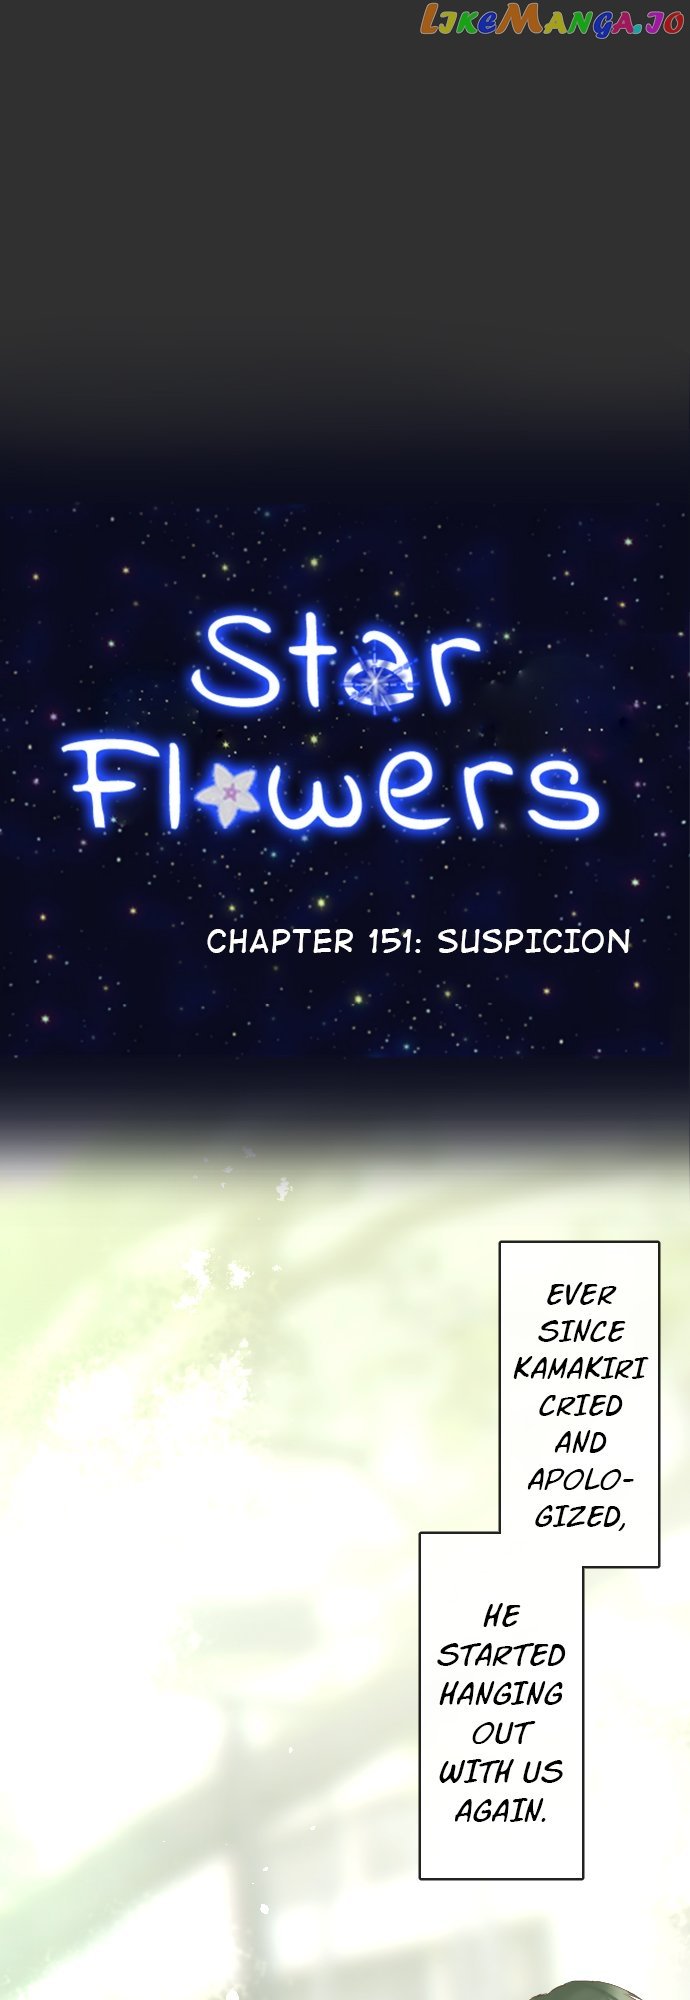 Star Flowers Chapter 151